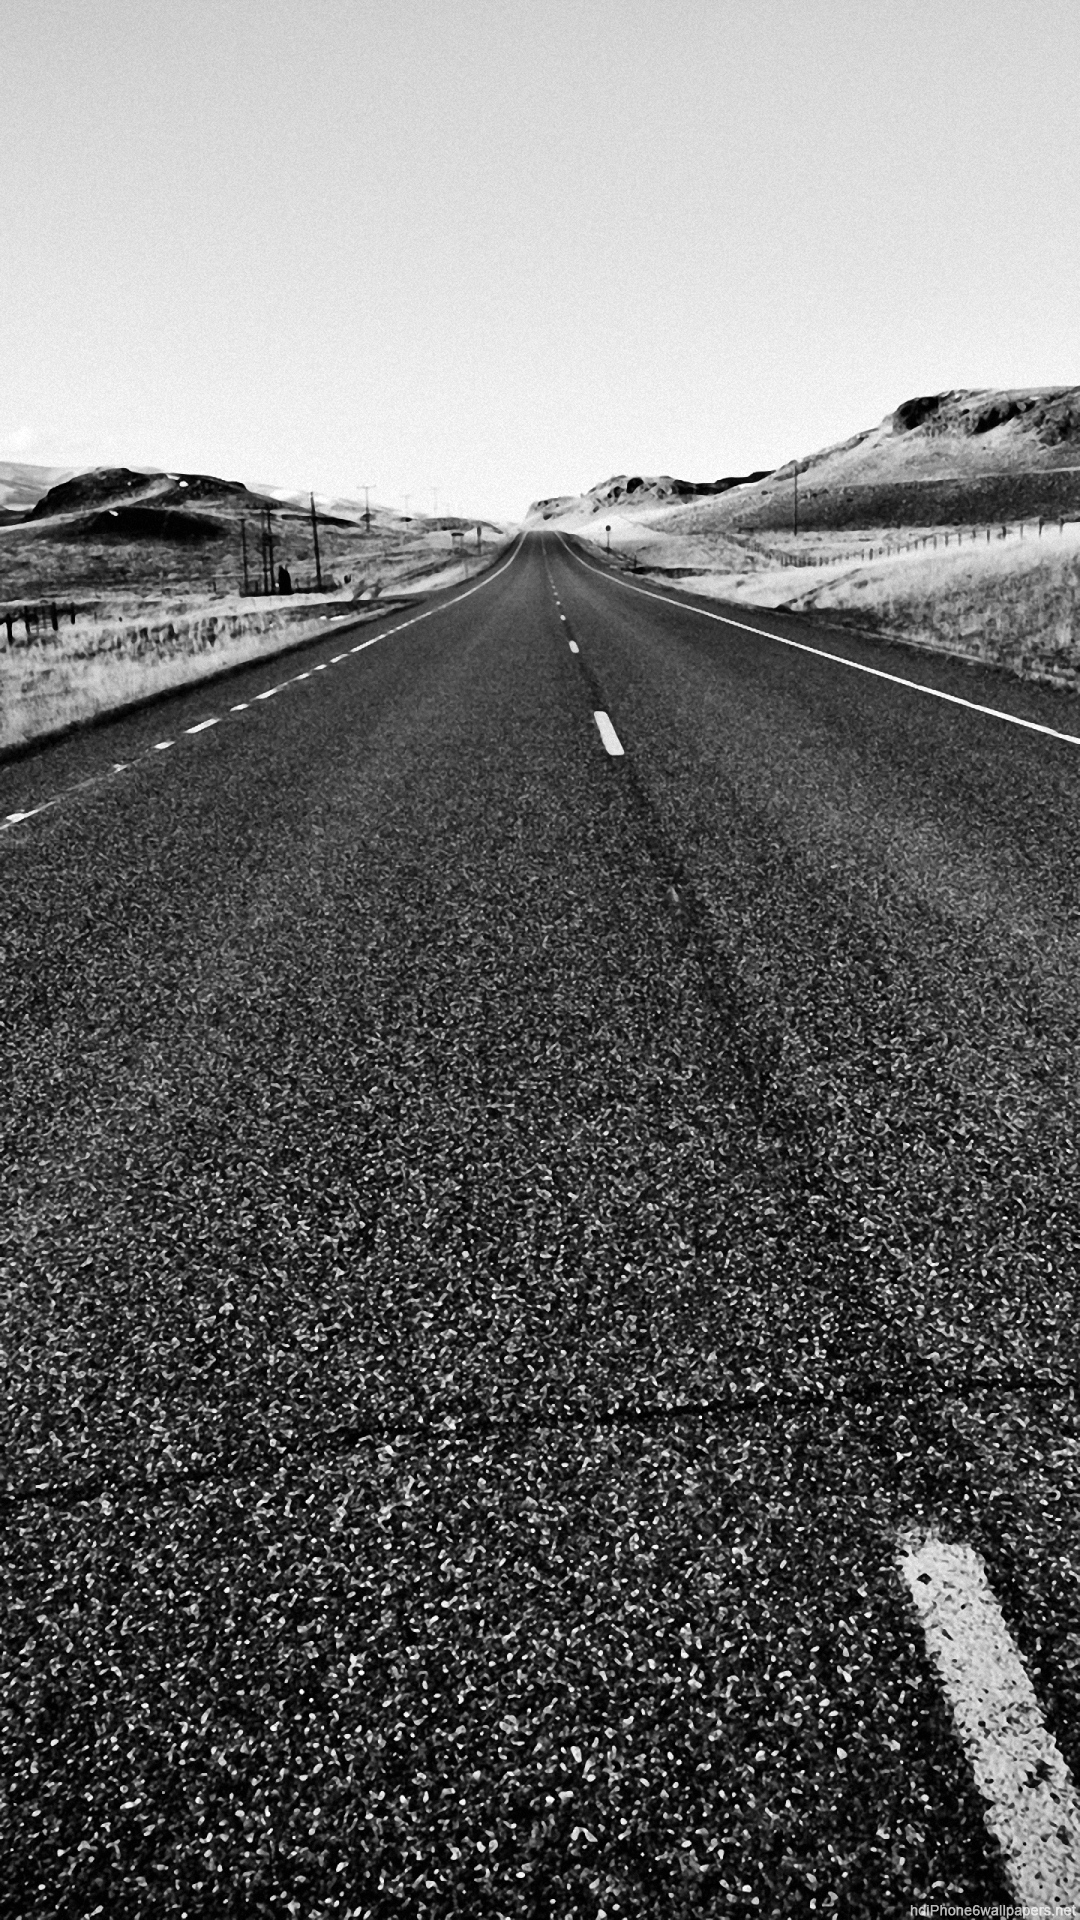 iphone 6 plus hd wallpapers 1080p,asphalt,black,road,black and white,road surface